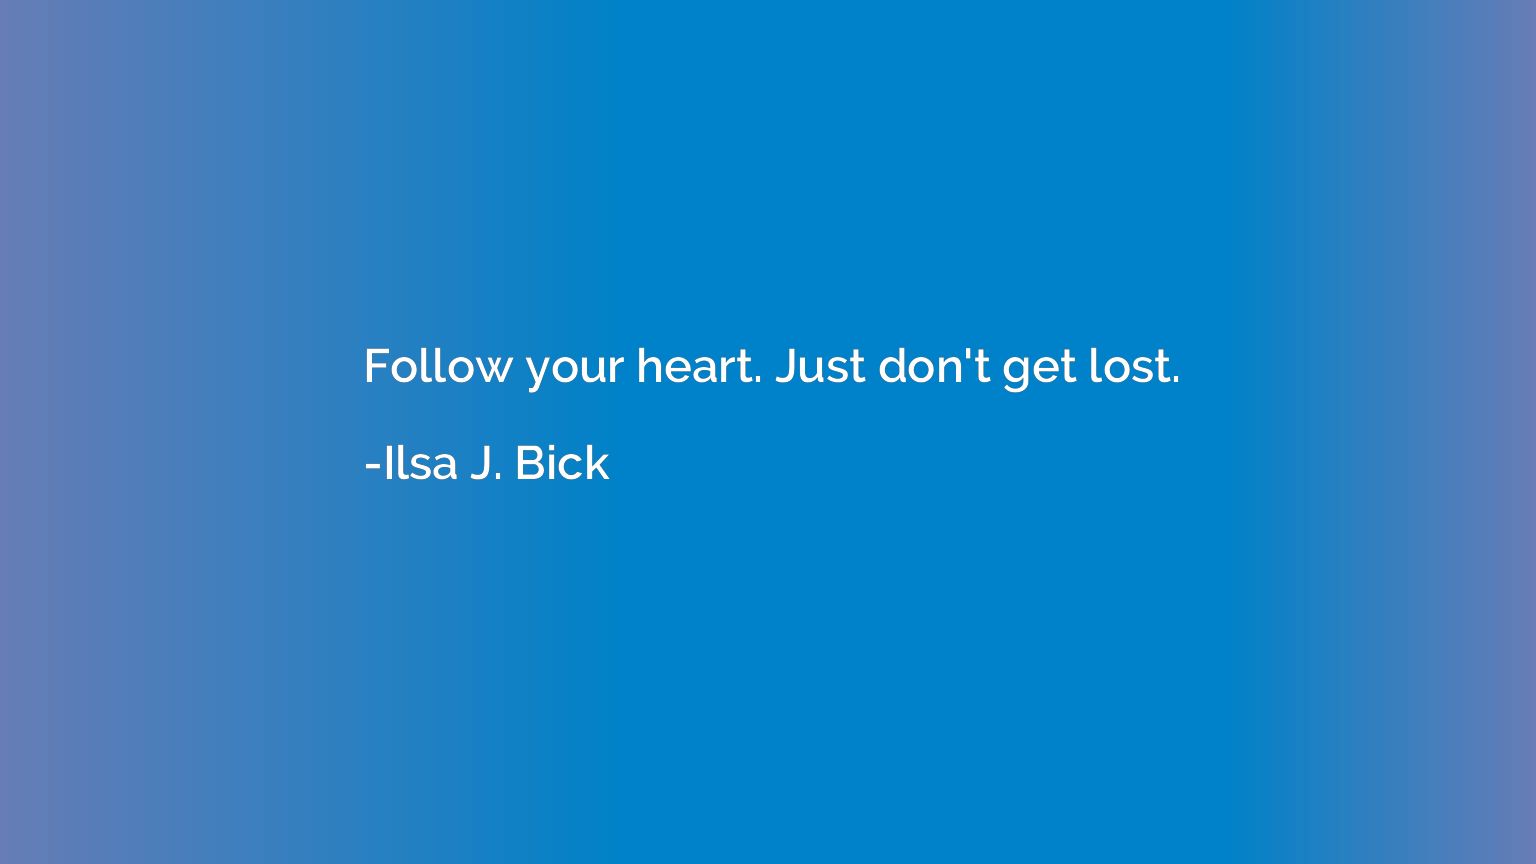 Follow your heart. Just don't get lost.